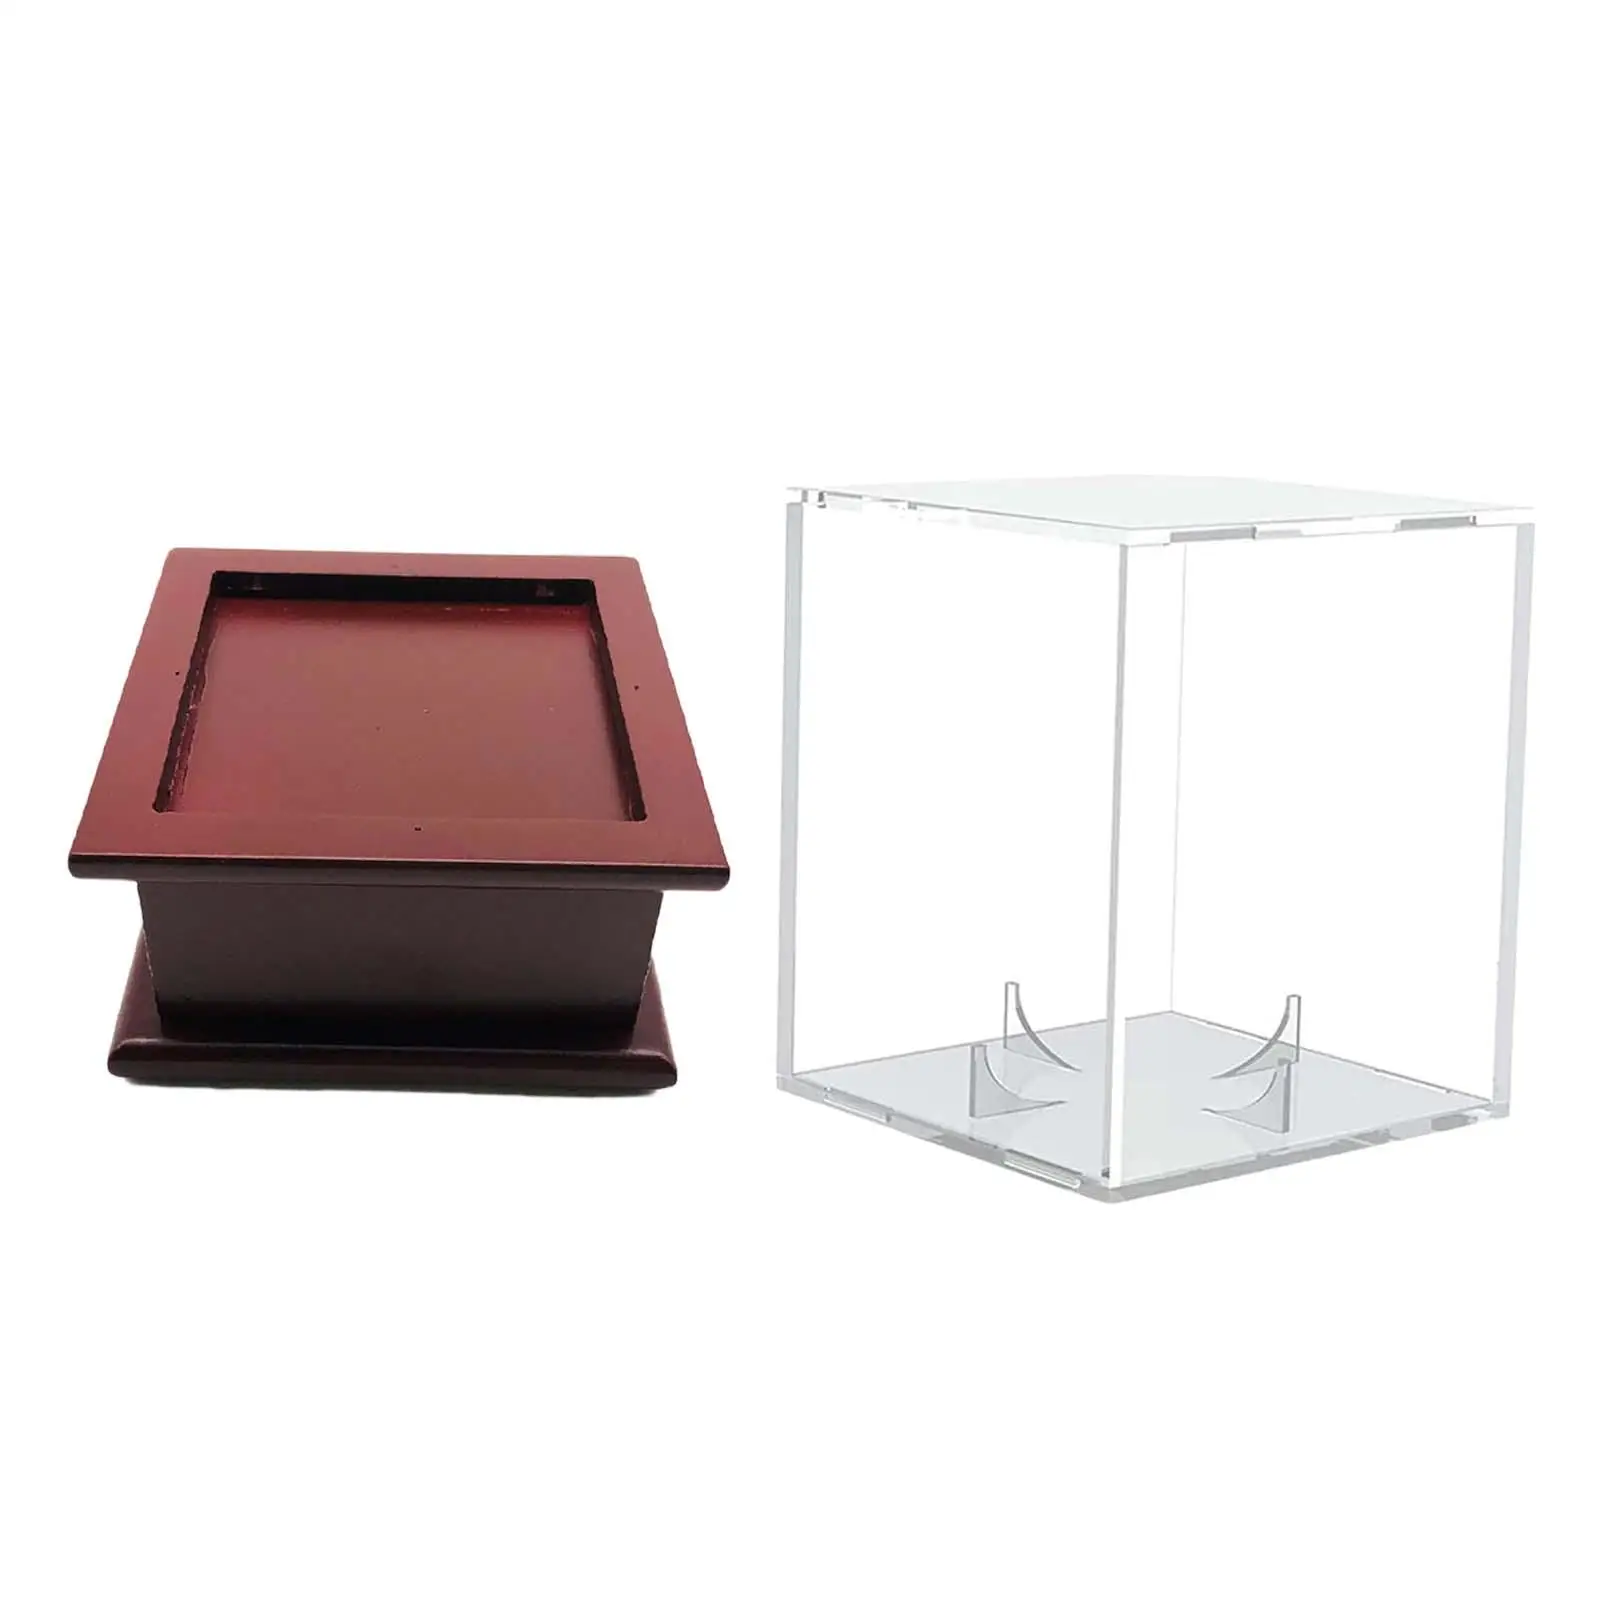 Acrylic Storage Box, Display Box, Dustproof Protection clear Display, Display Box, for Collectibles Official Size Ball